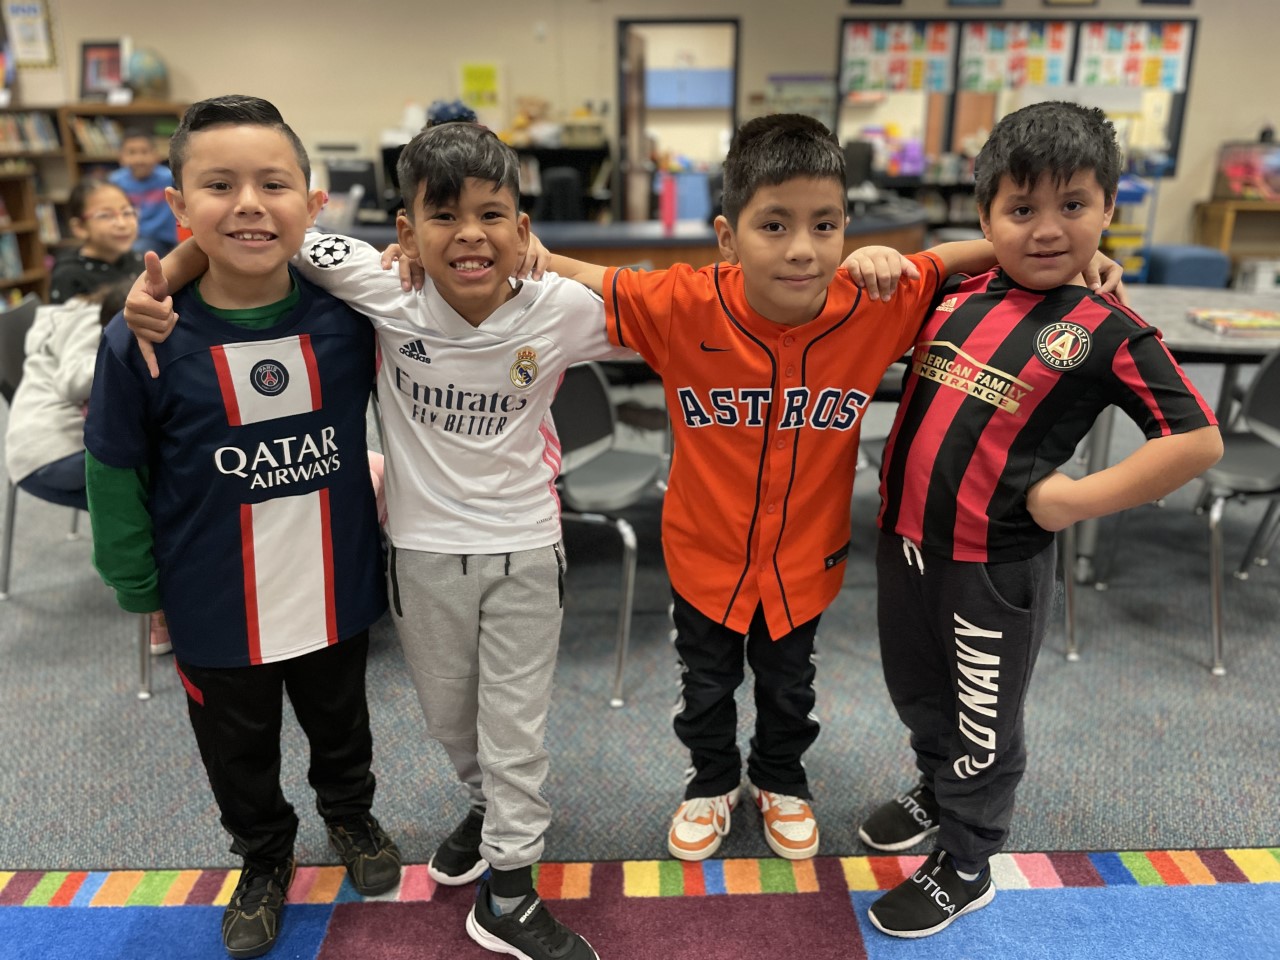 Students at Houser kicked off Kindness Week by wearing their favorite sports team shirts!